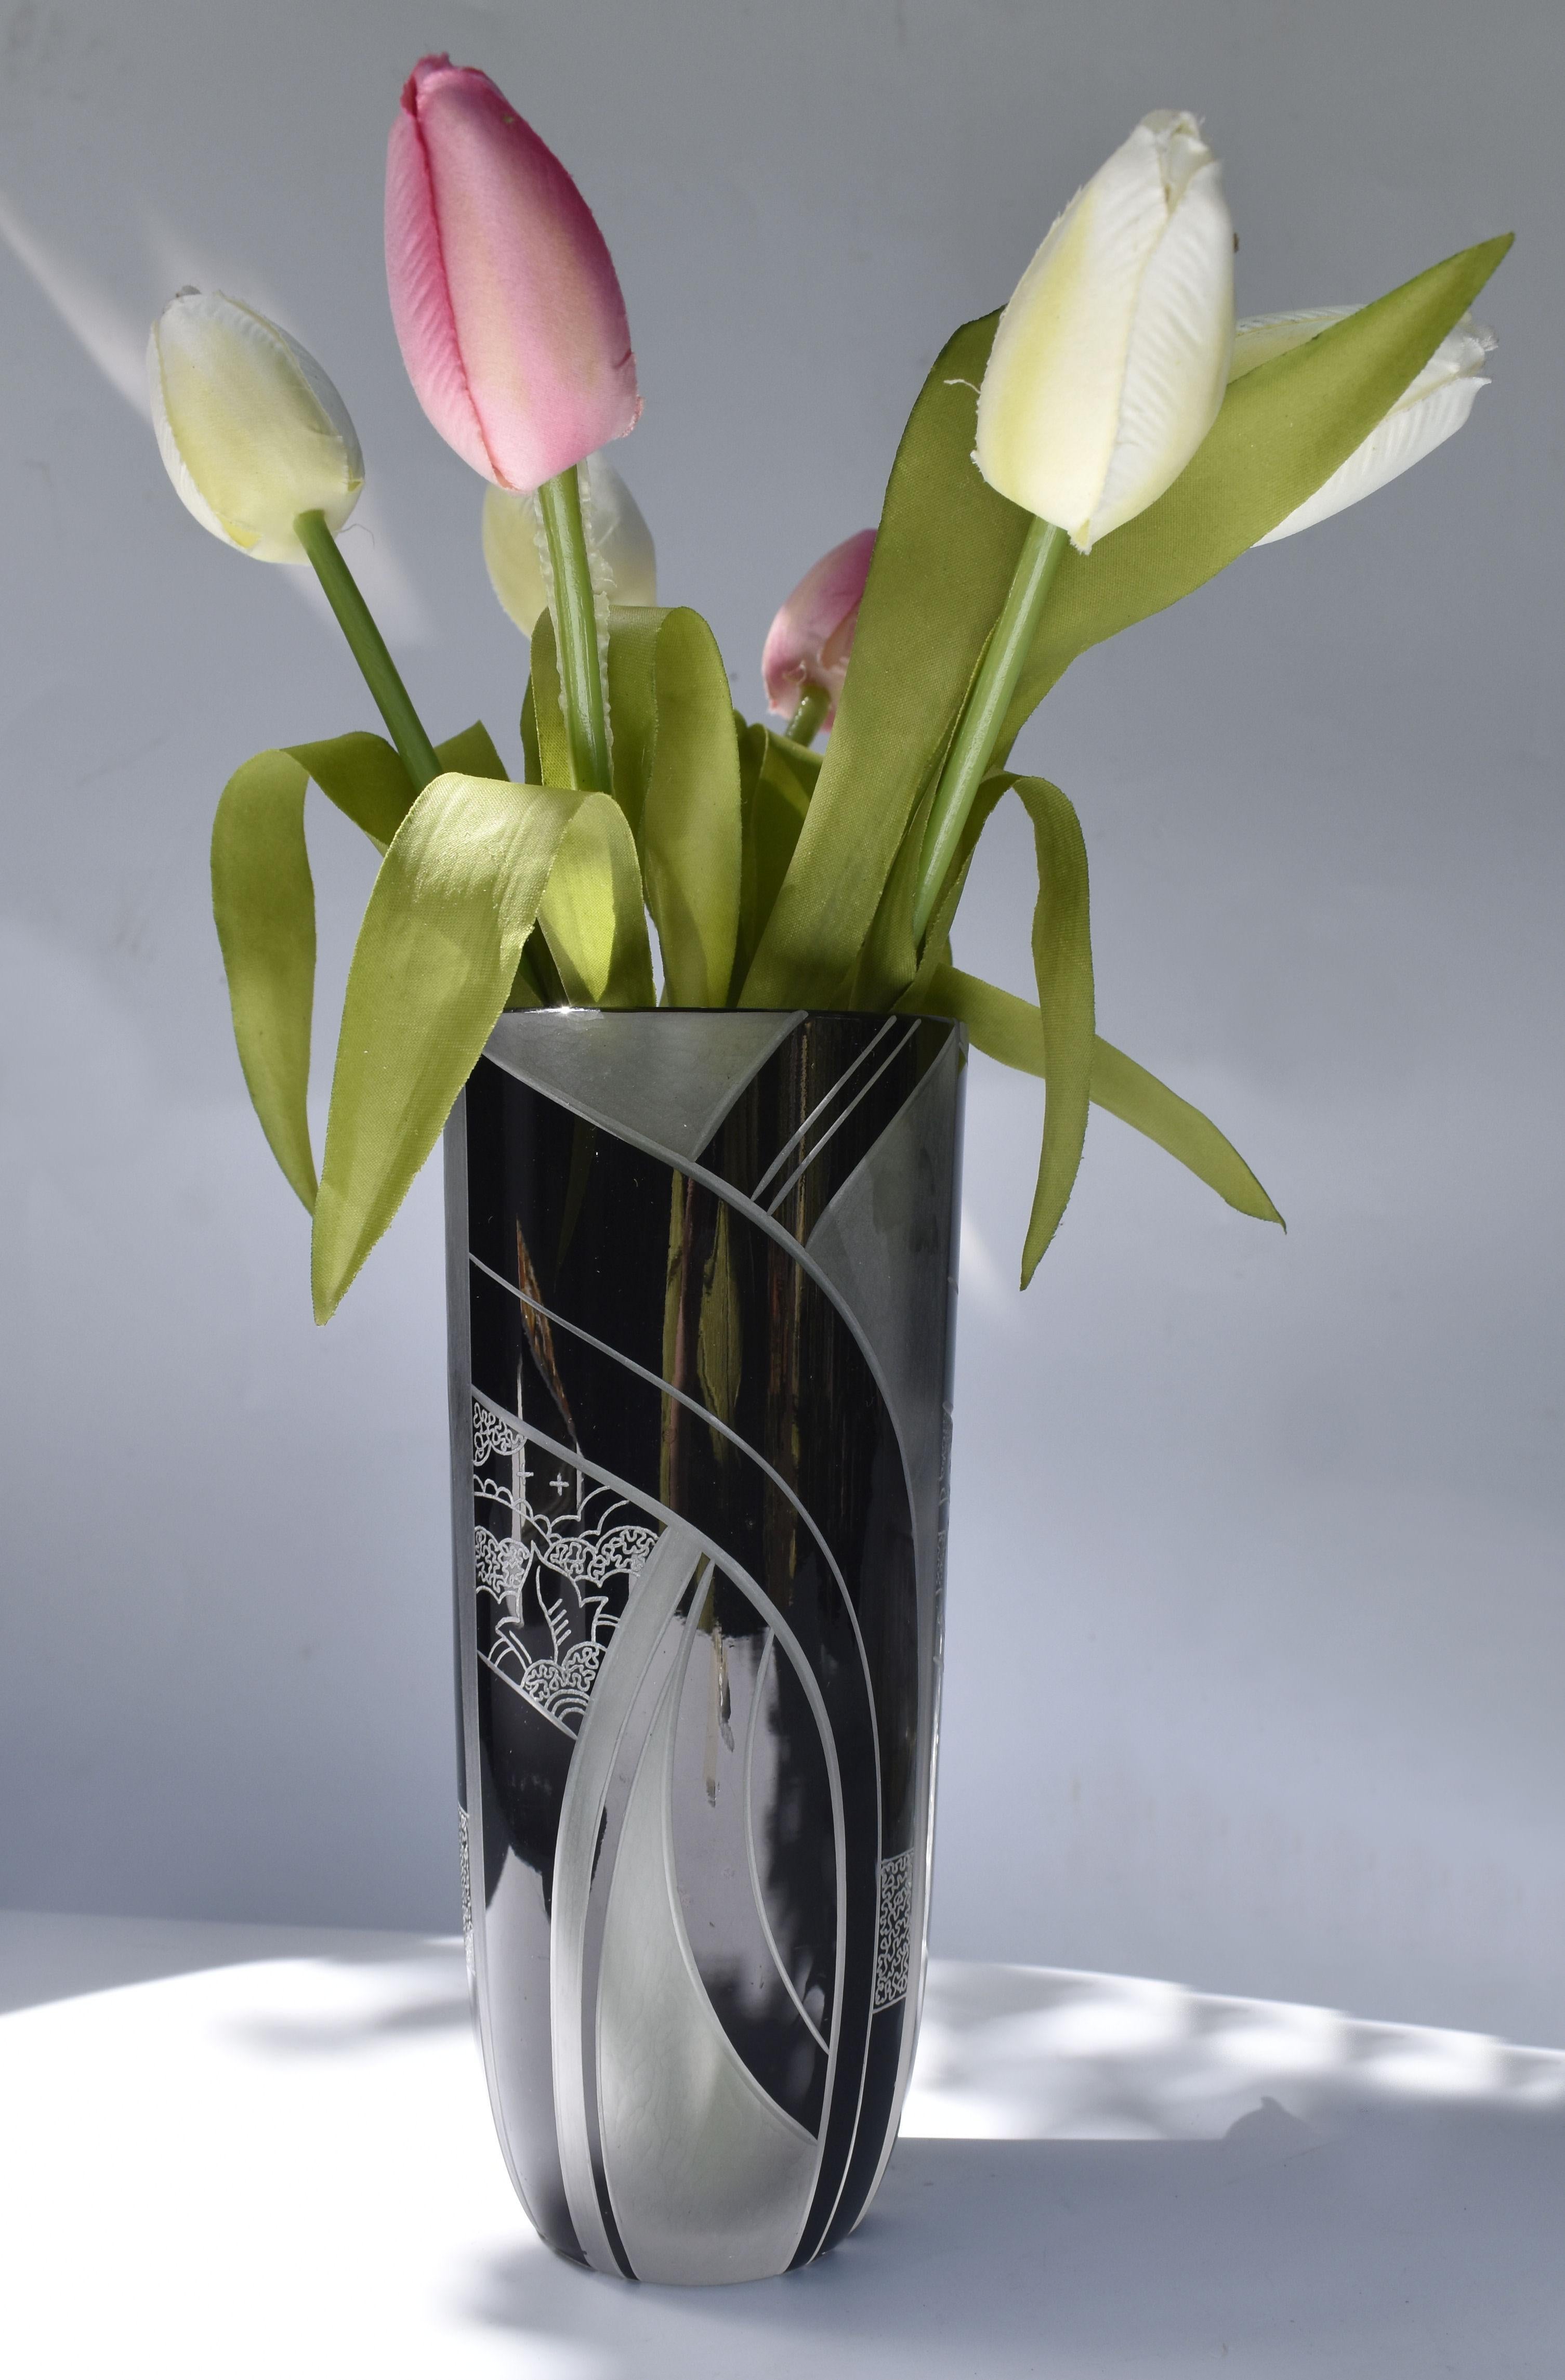 Standing 20 cm tall we offer for your consideration is this exceptional 1930's Art Deco glass vase, and what a gem it is! It's beautifully elegant and with the most glorious geometric decoration. Features clear and frosted glass with jet black